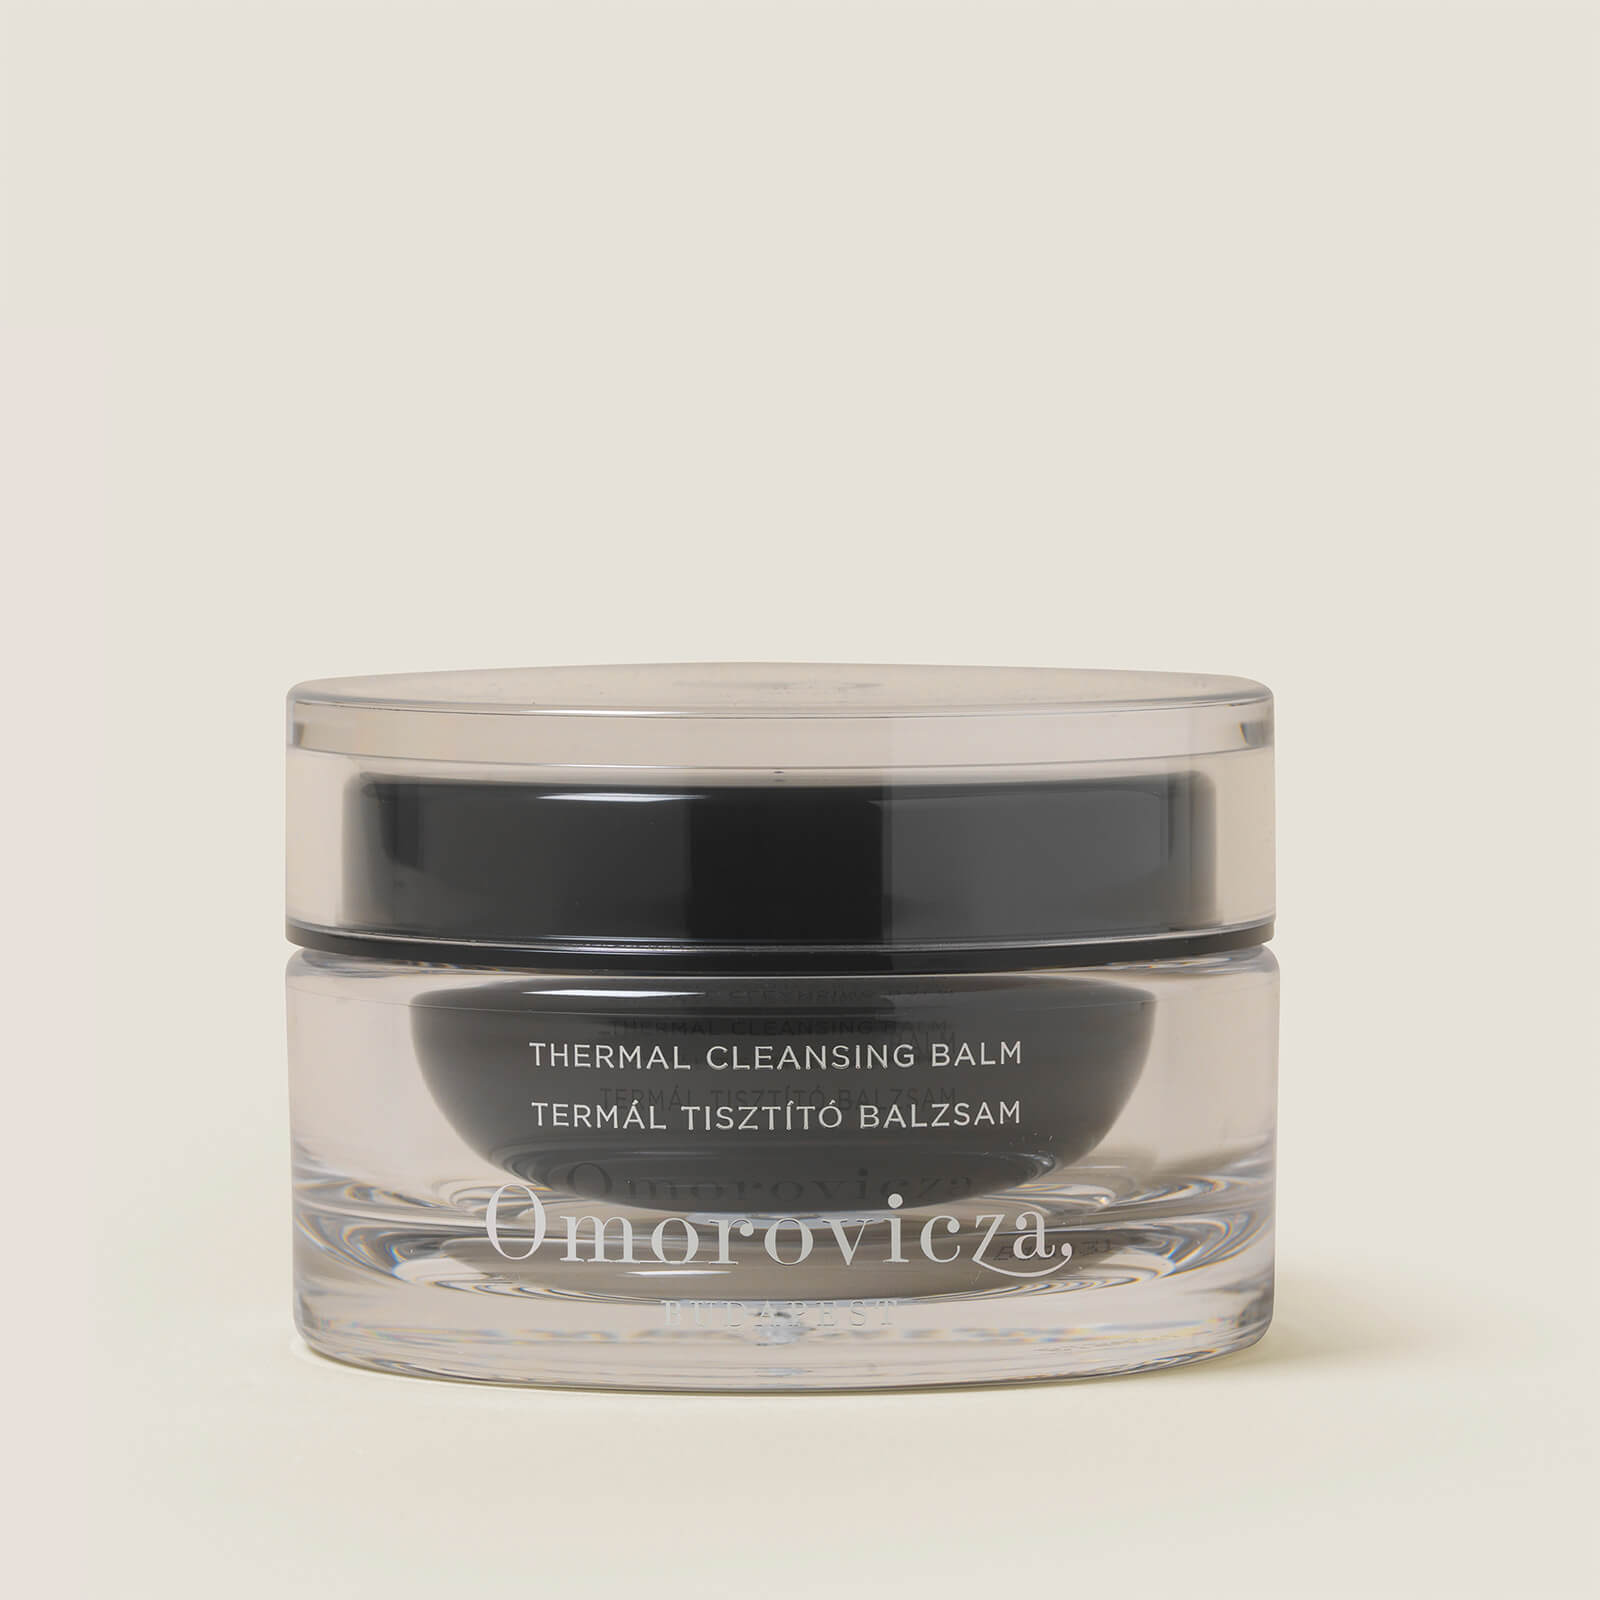 omorovicza thermal cleansing balm supersize -100ml  (worth £92.00)